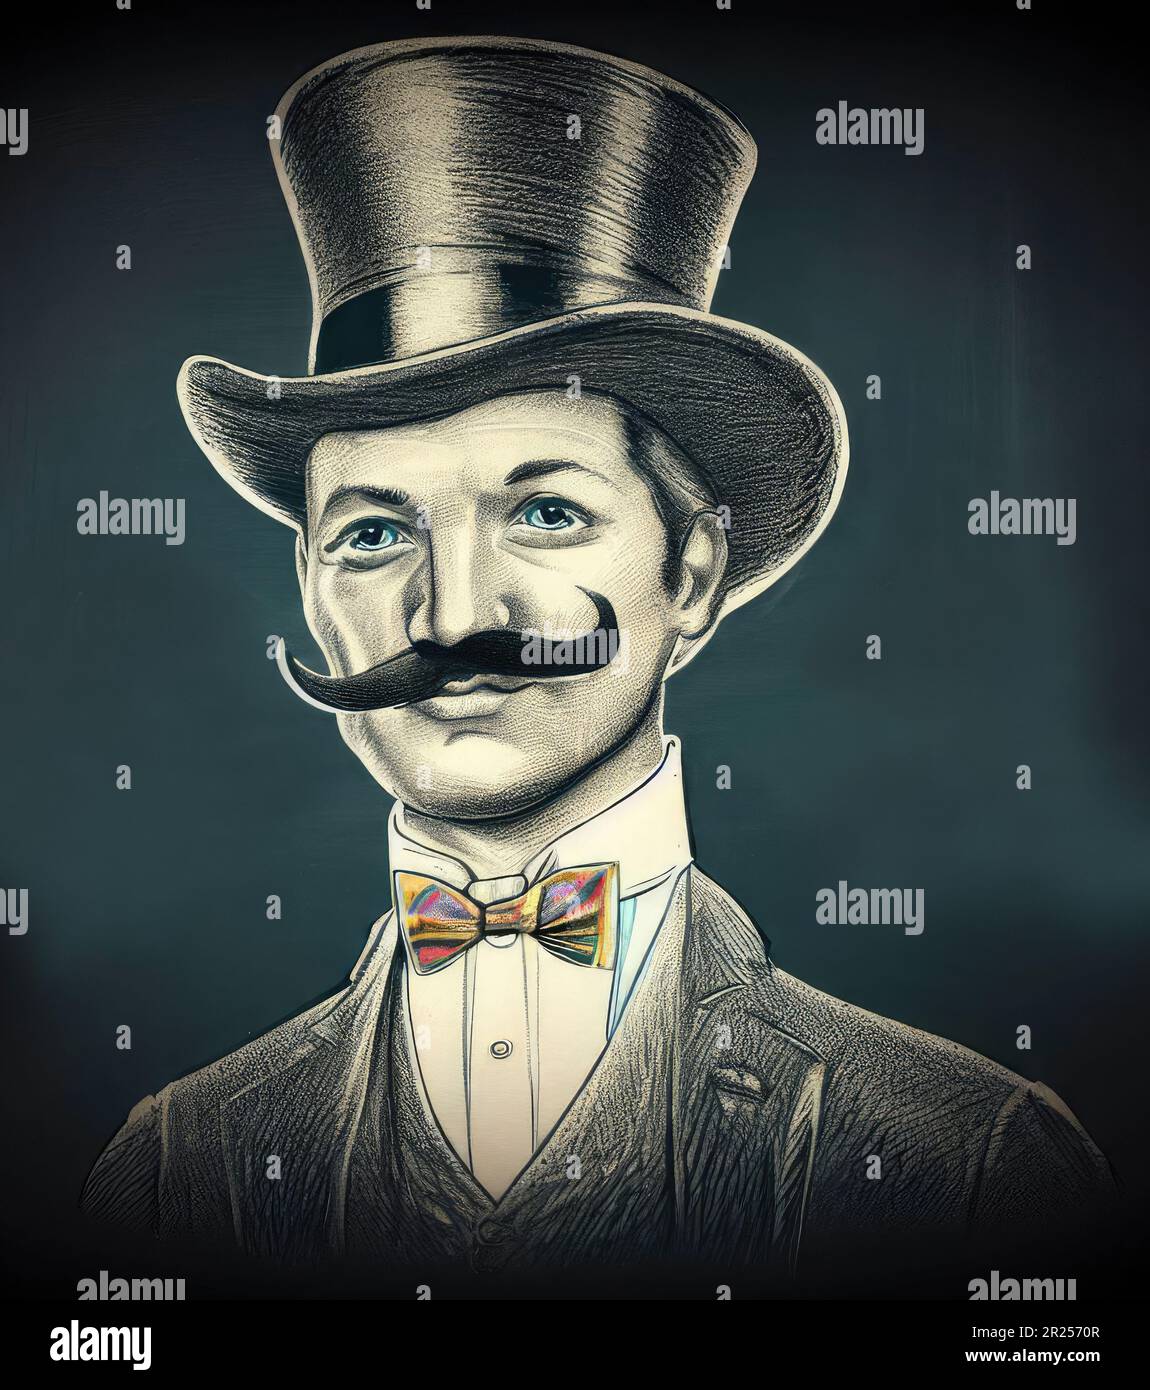 A vintage chalk sketch of a Victorian gentleman in a colorful bowtie and top hat, on a chalkboard background Stock Photo